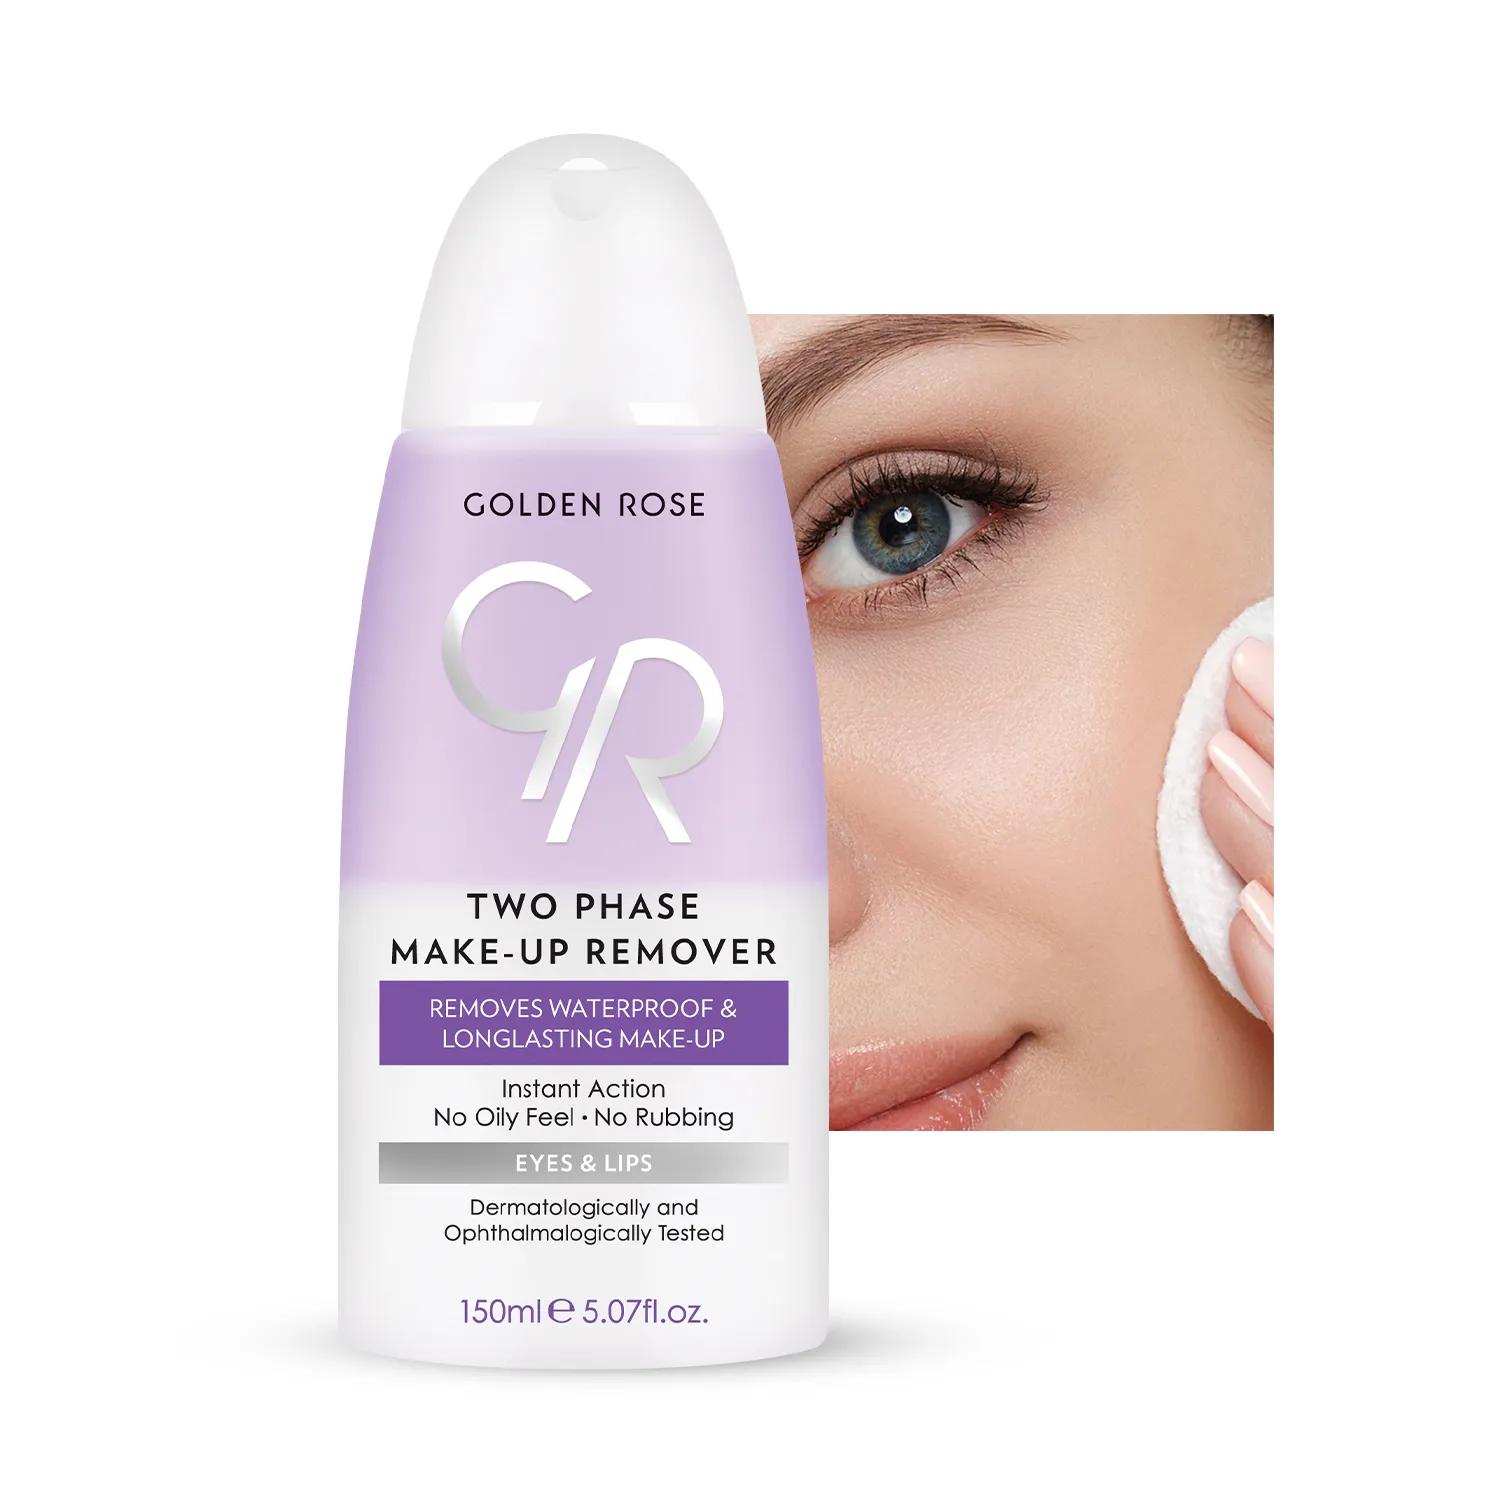 Golden Rose Two Phase Make-Up Remover